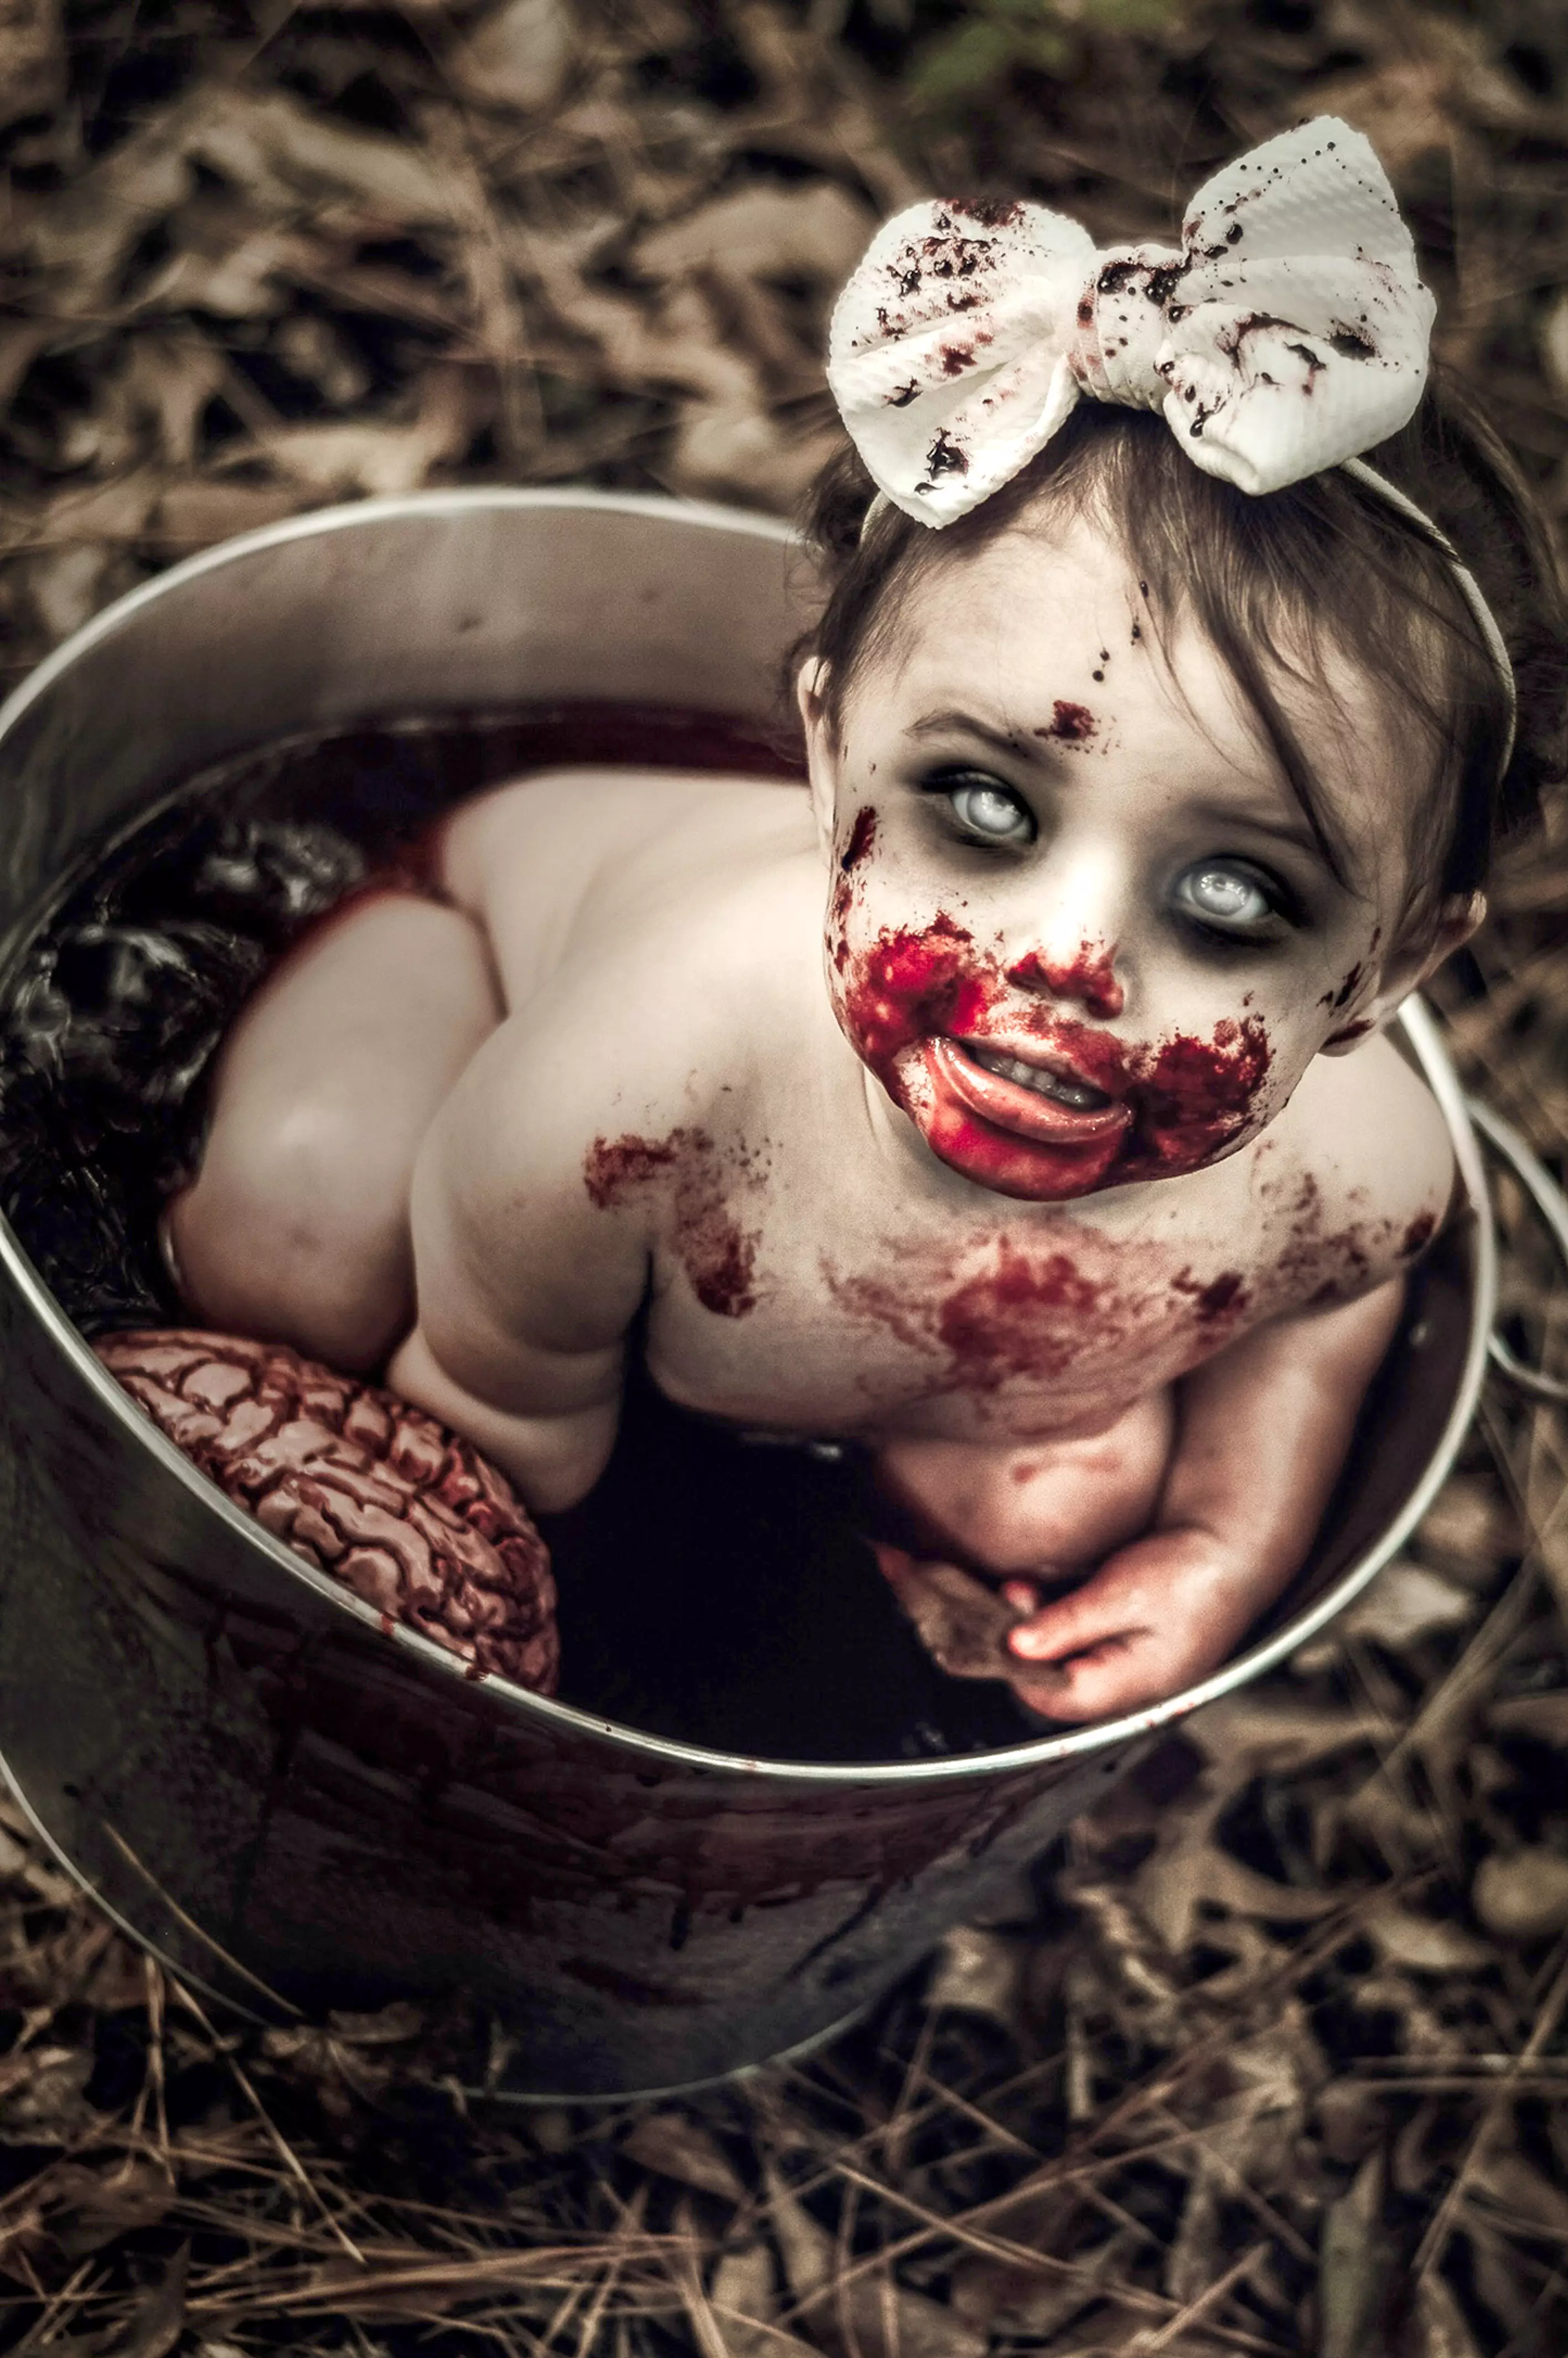 One-year-old Coraline poses in a bucket of fake blood made from jelly and chocolate. (